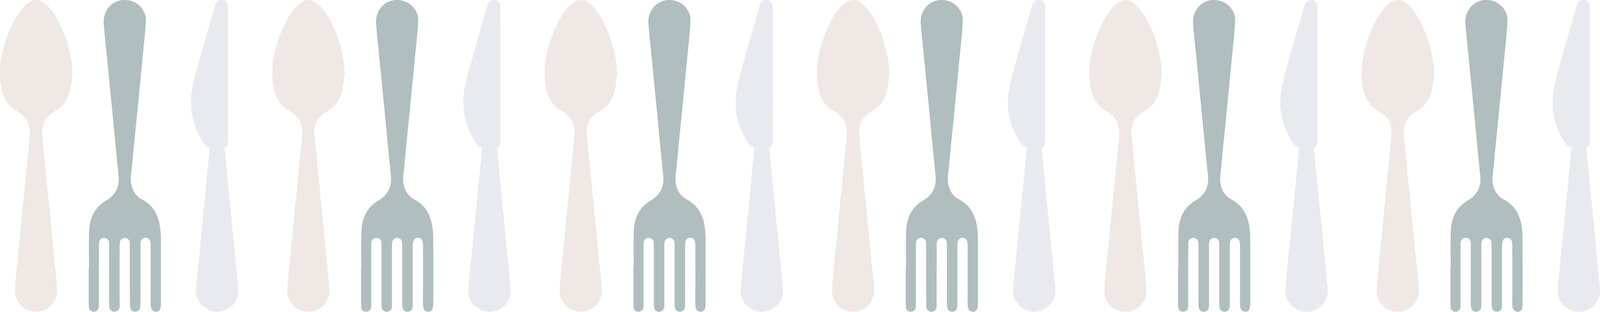 Fork, knife, and spoon pattern